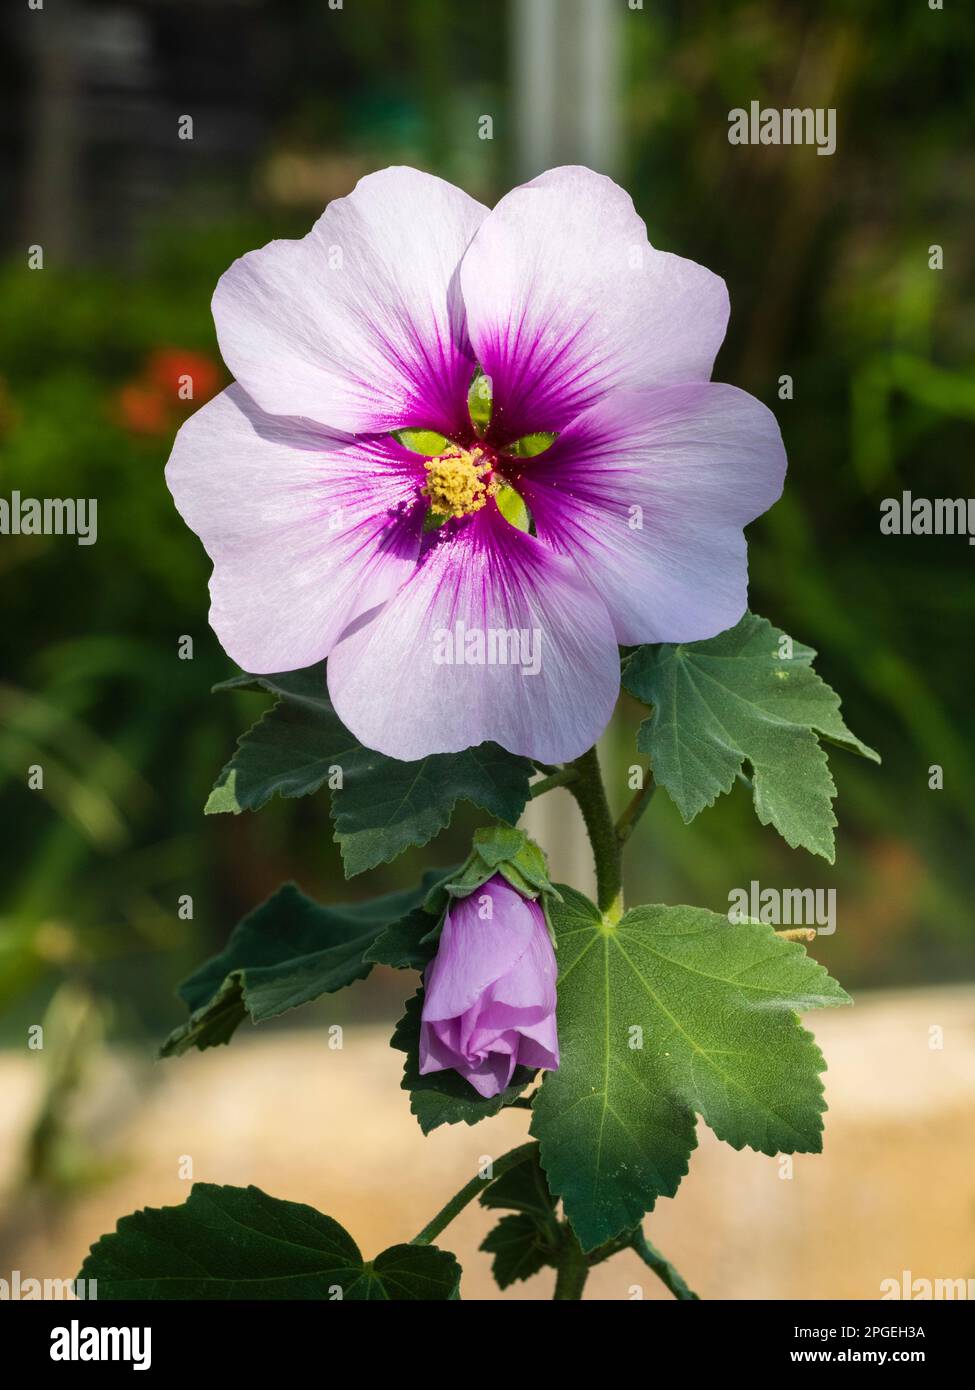 Pink centered white flower and opening bud of the hal-hardy tree mallow shrub, Lavatera aff maritima 'Bicolor' Stock Photo